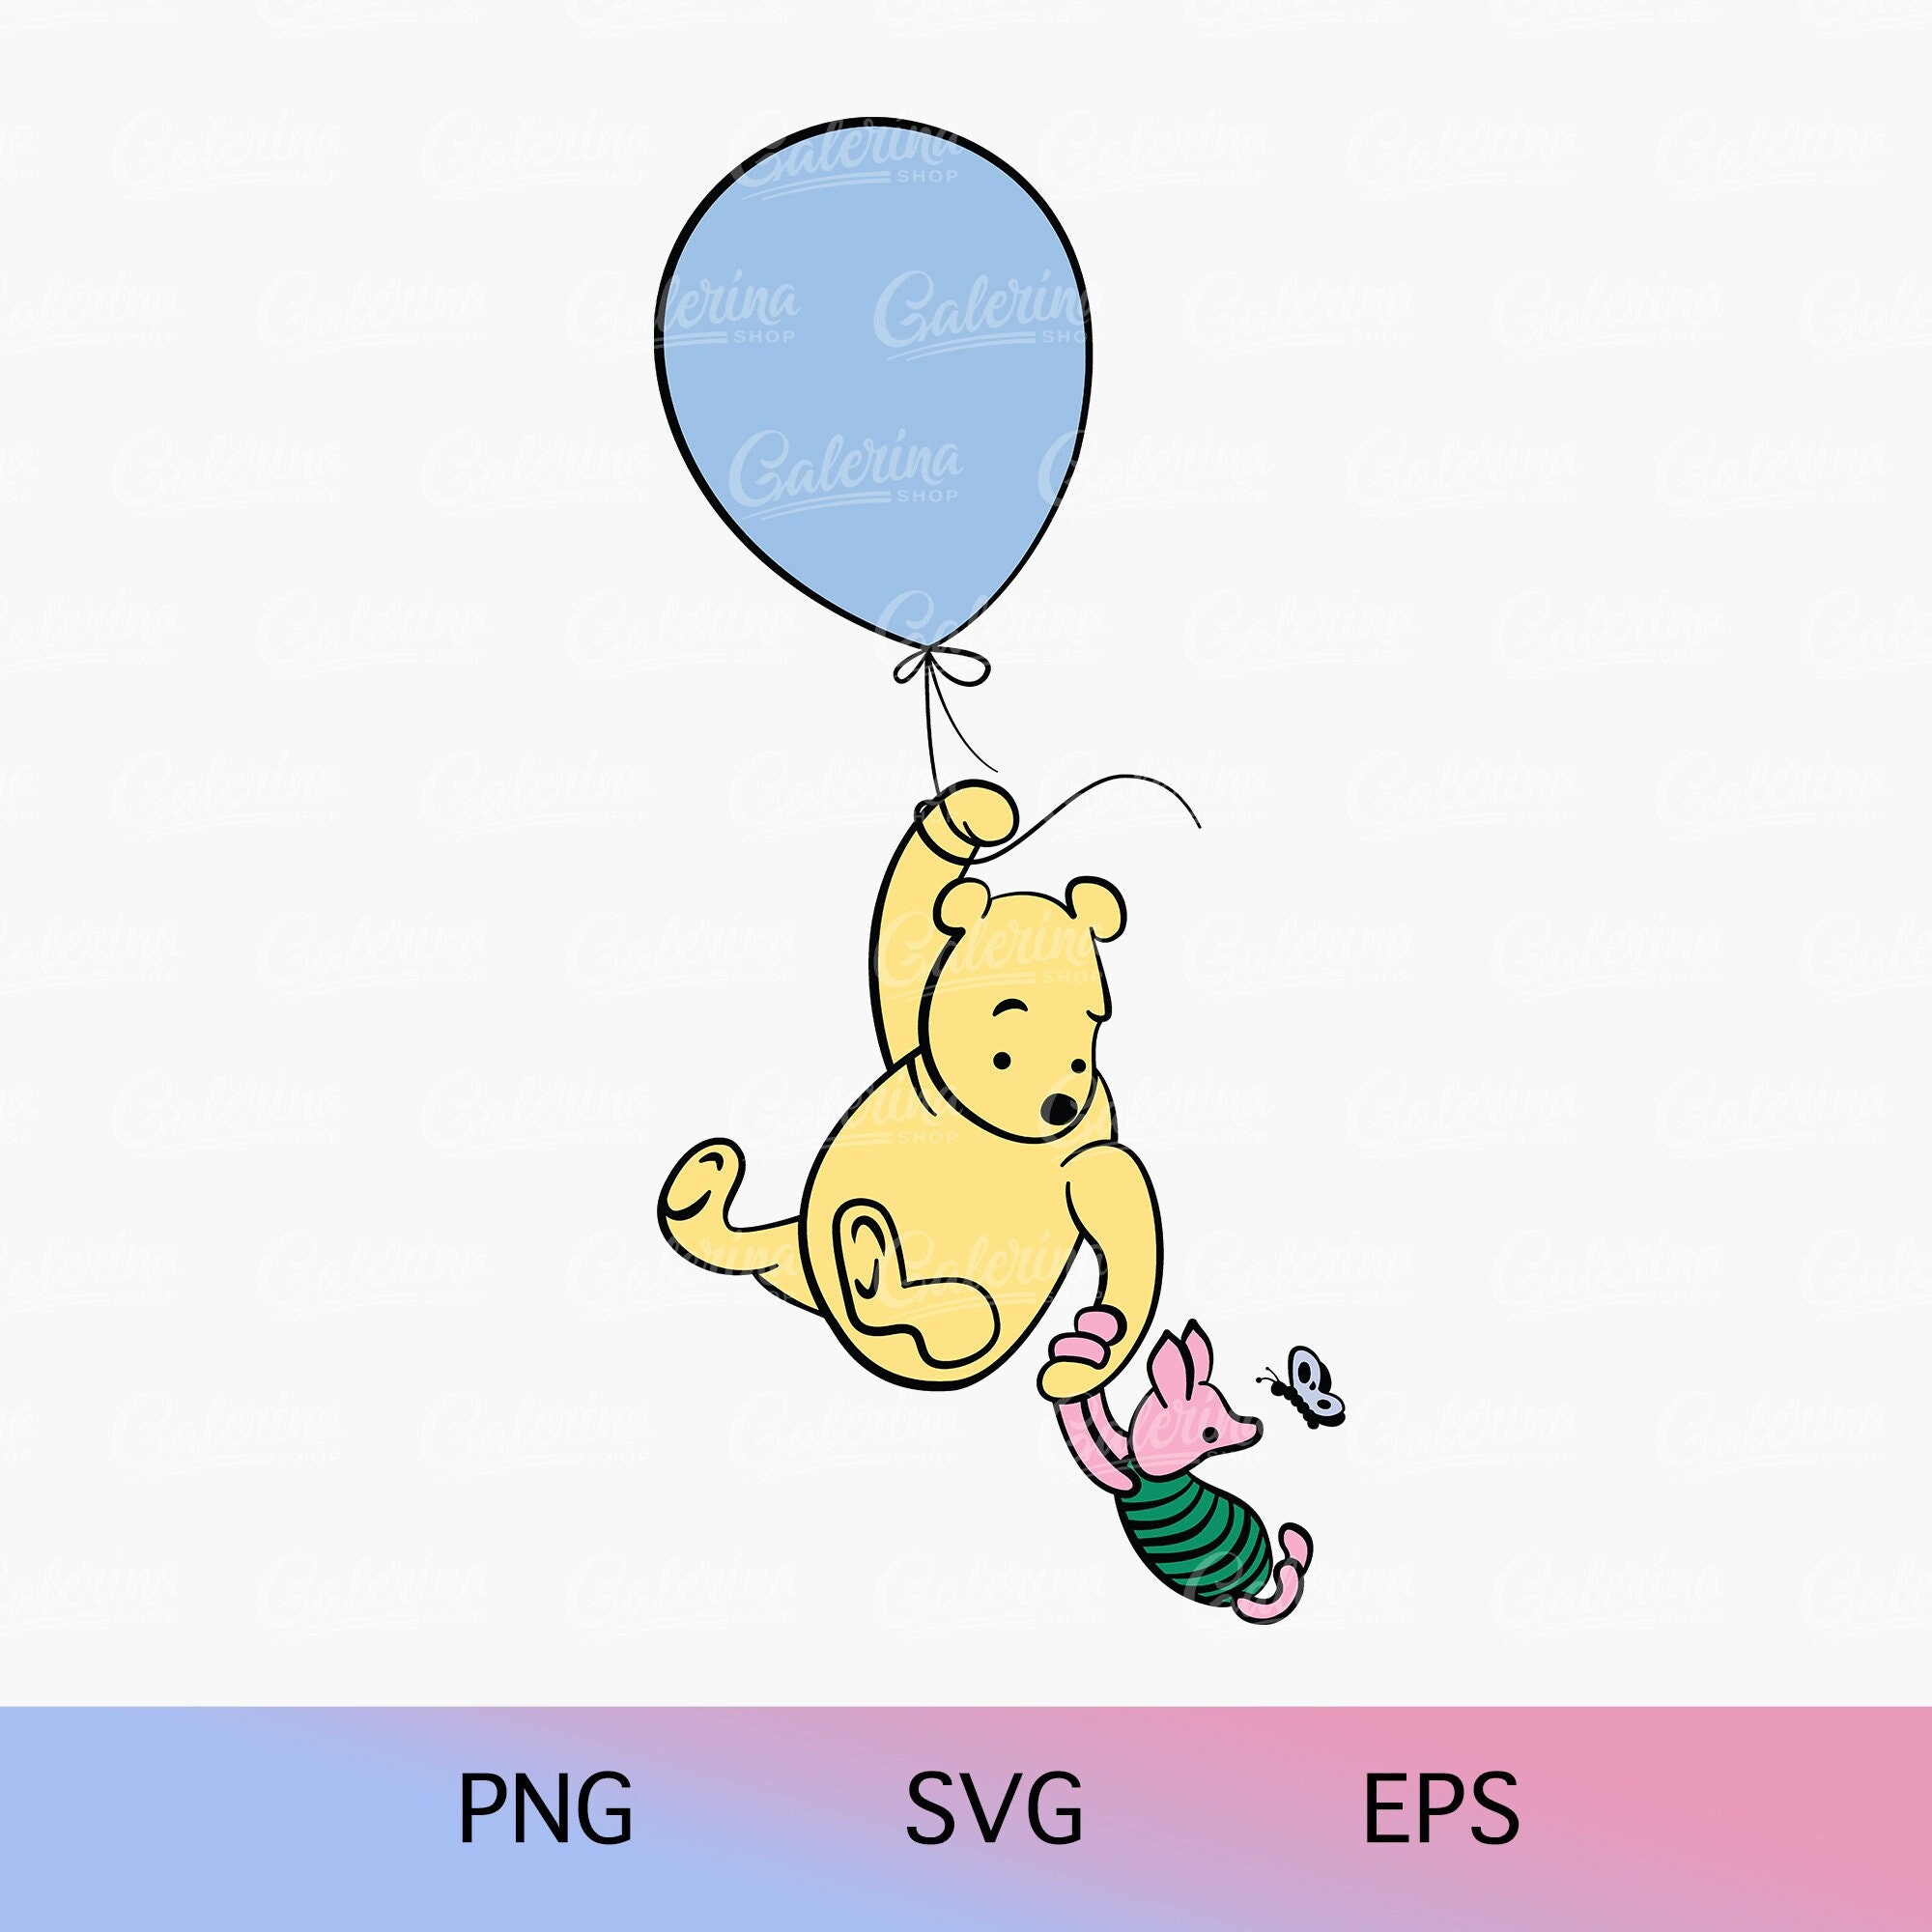 Winnie the Pooh SVG PNG, Pooh Baby Shower, Blue Balloon, Classic Pooh ...